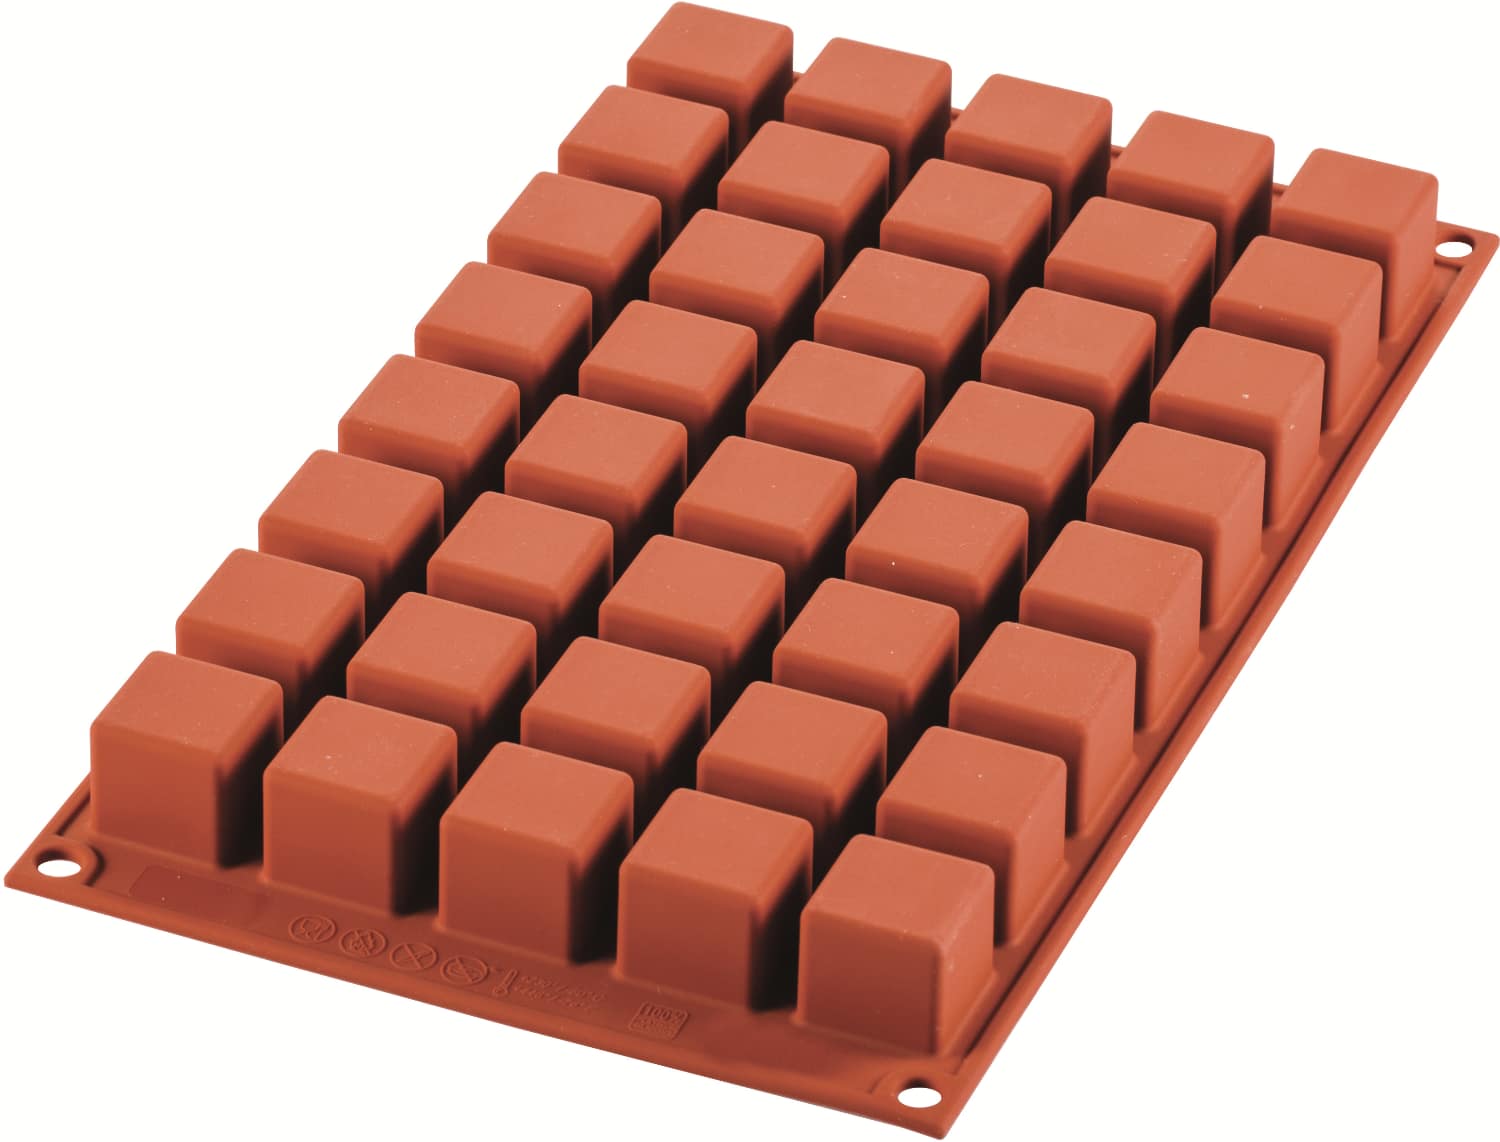 Silicone baking moulds "Cube" 300 x 175 mm 115228